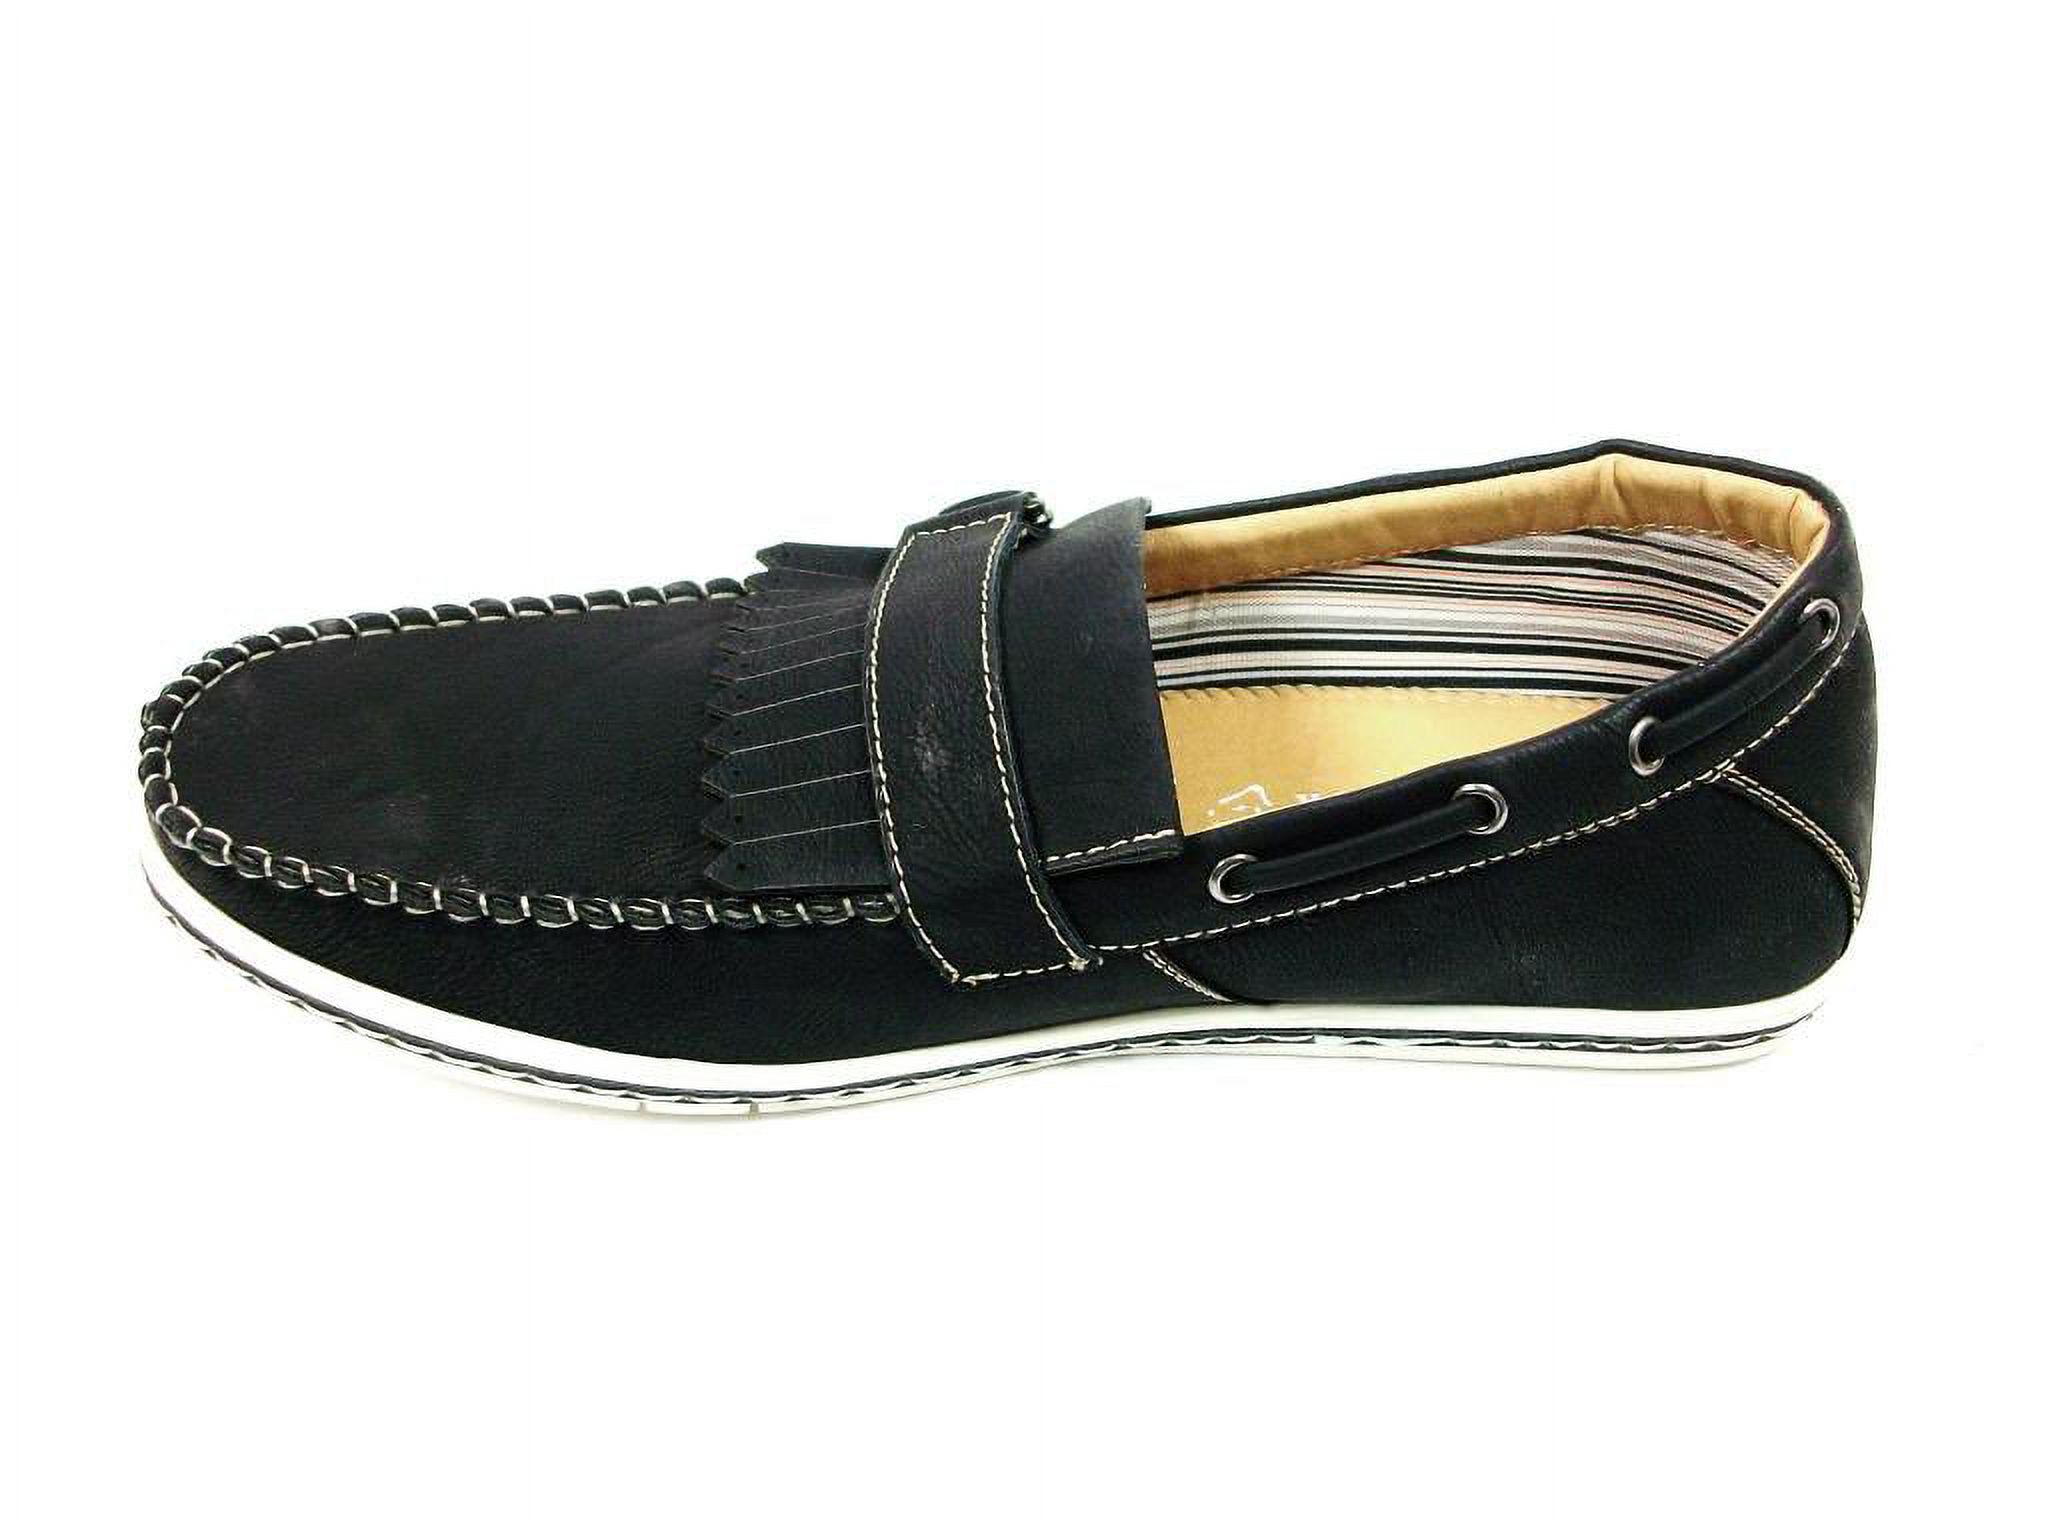 Polar Fox Mens Black Slip on Casual Driving Boat Shoes Buckle Design Styled In Italy - image 3 of 6